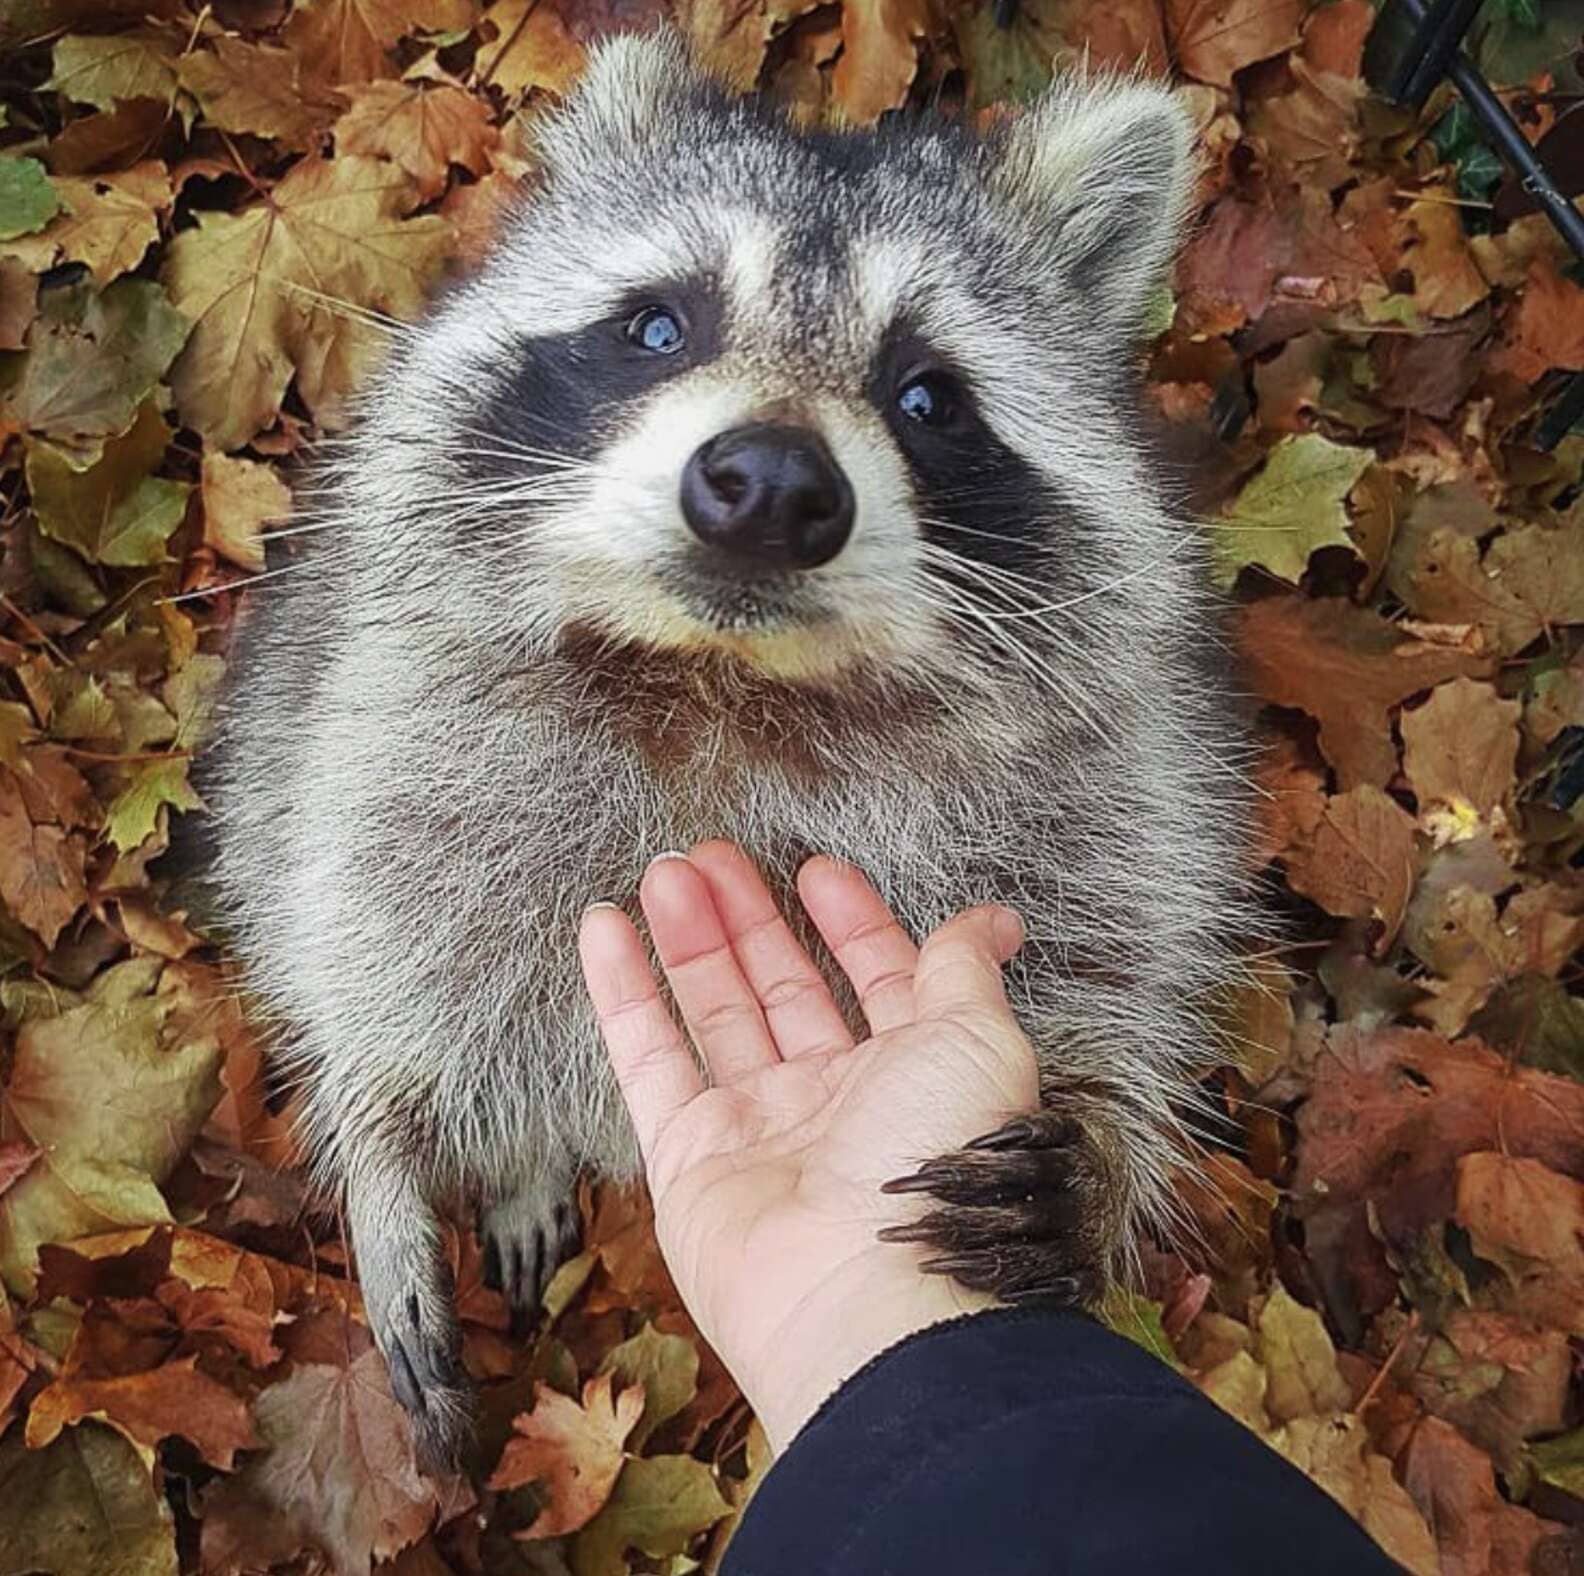 Released back into the wild, this rescued raccoon